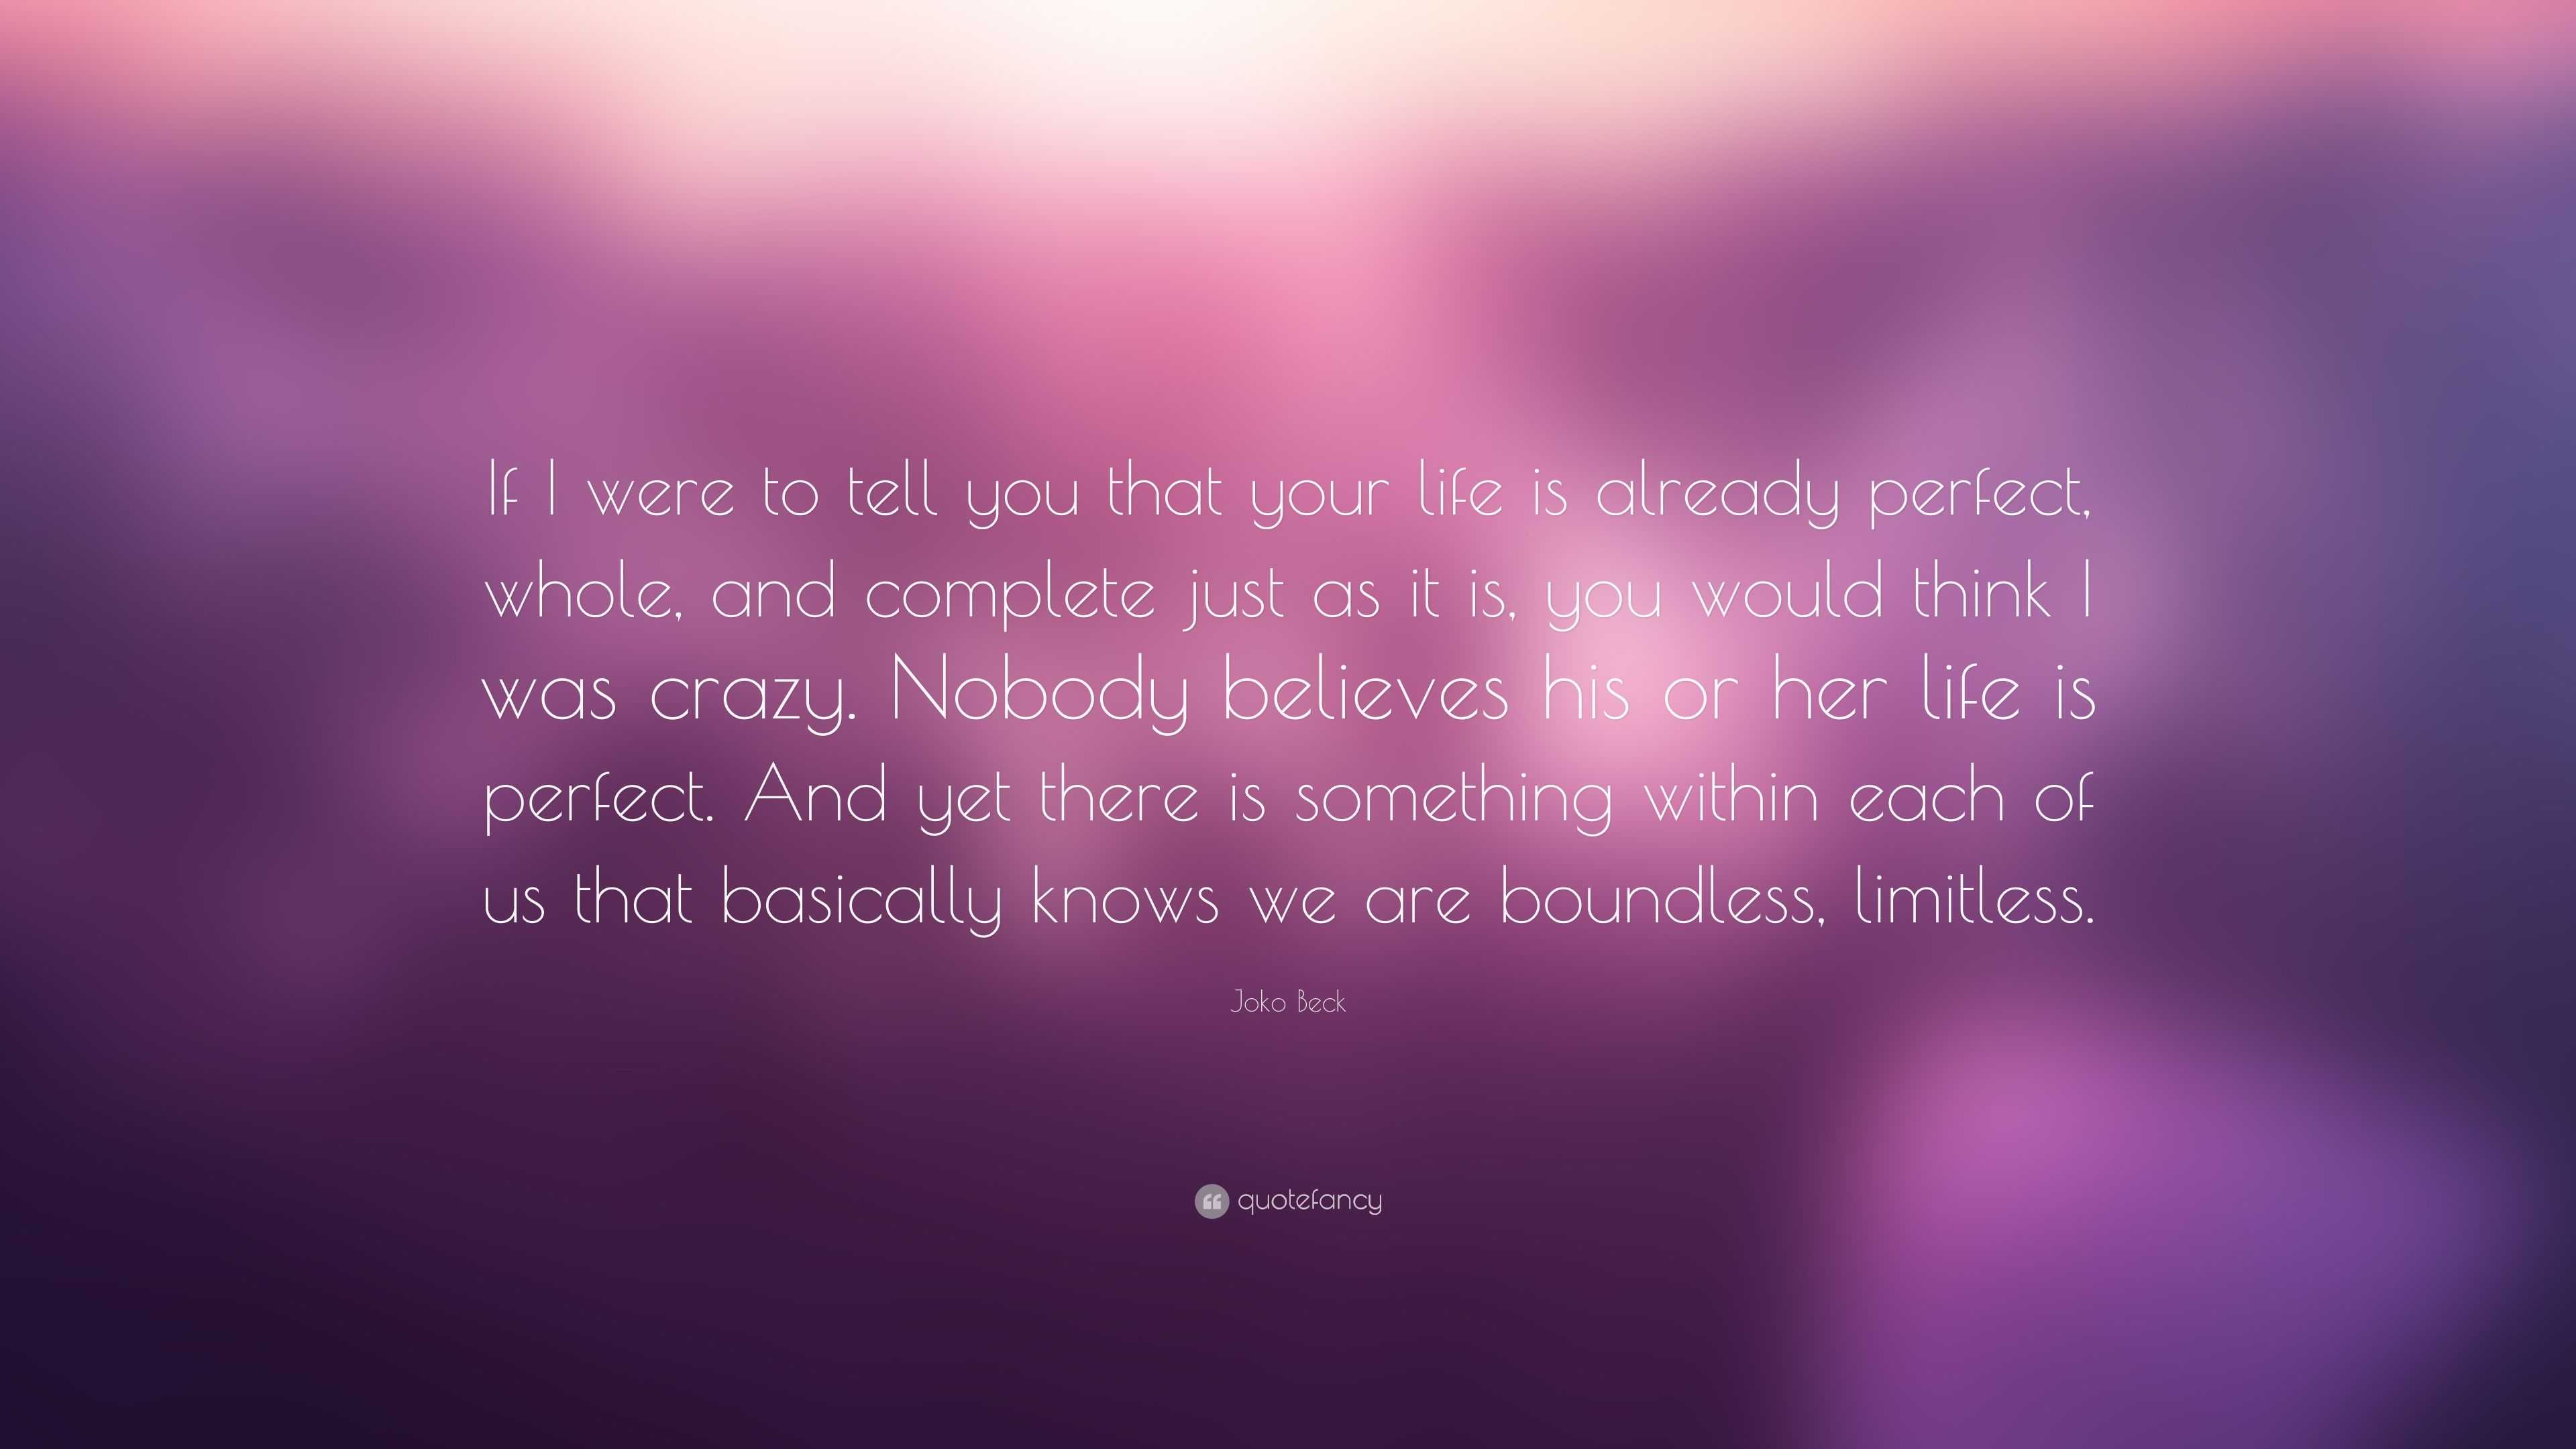 Joko Beck Quote: “If I were to tell you that your life is already ...